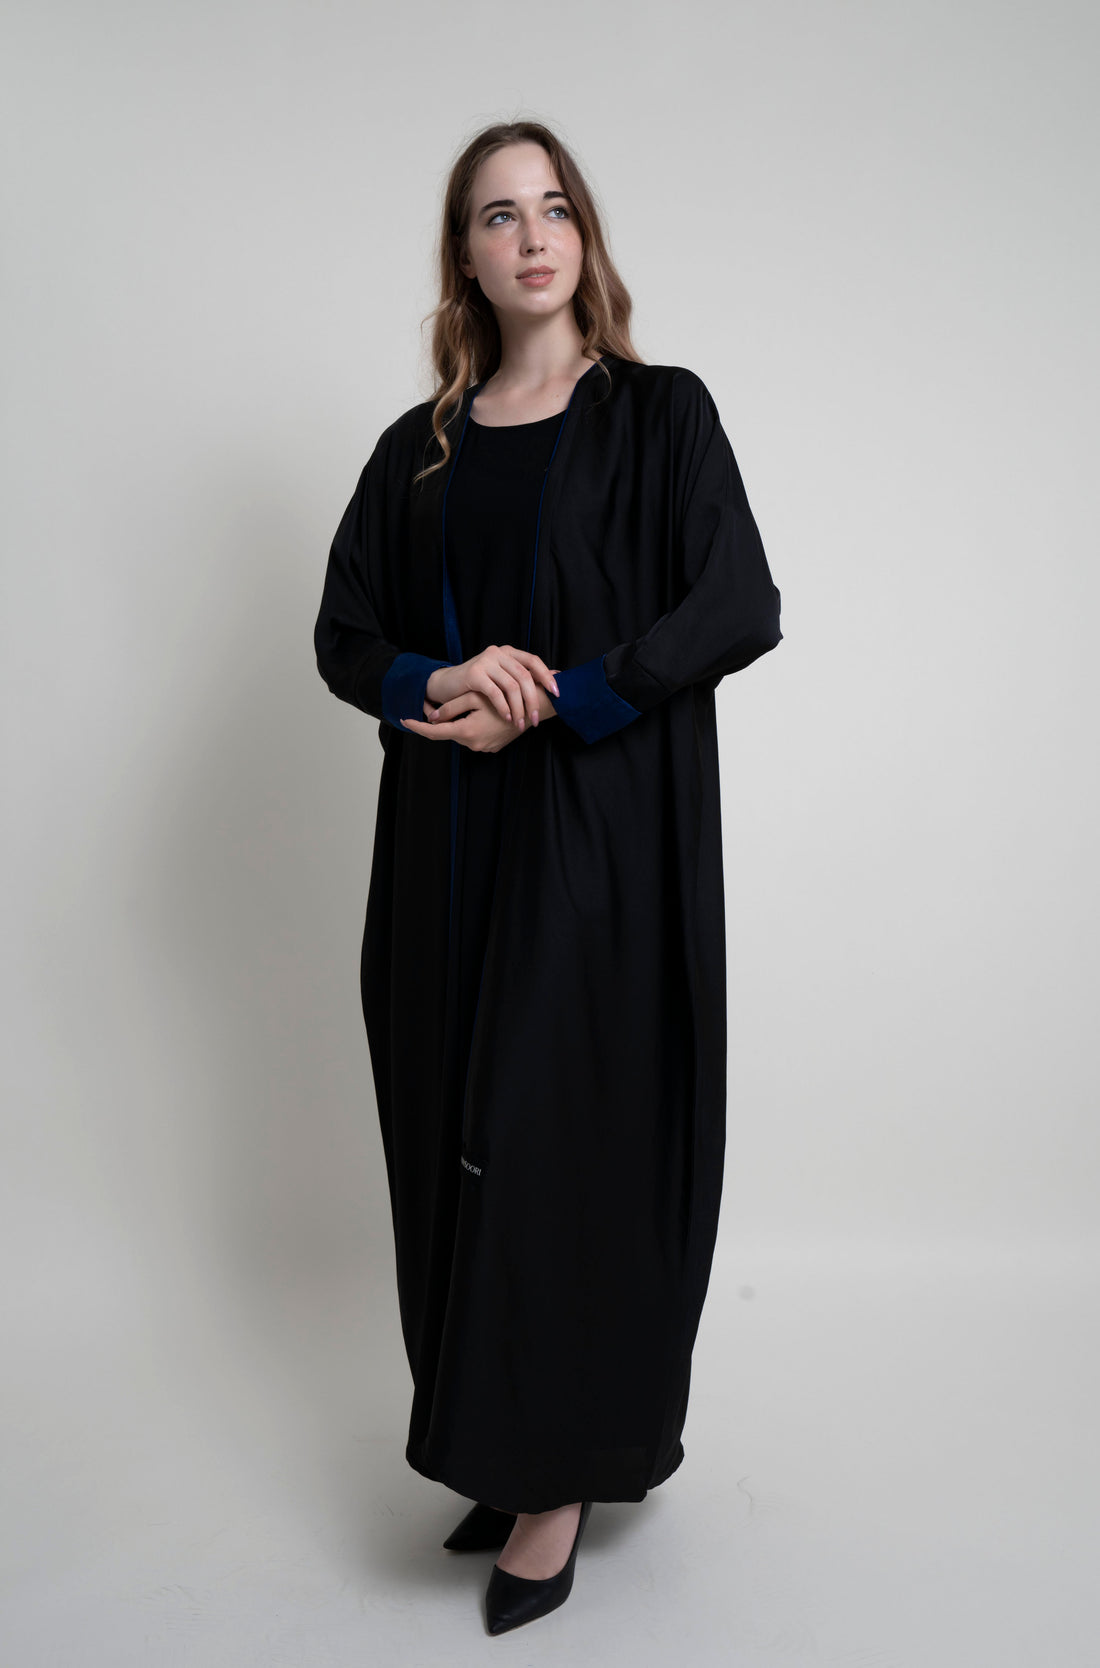 Shop Our Latest Designs In Black Abayas